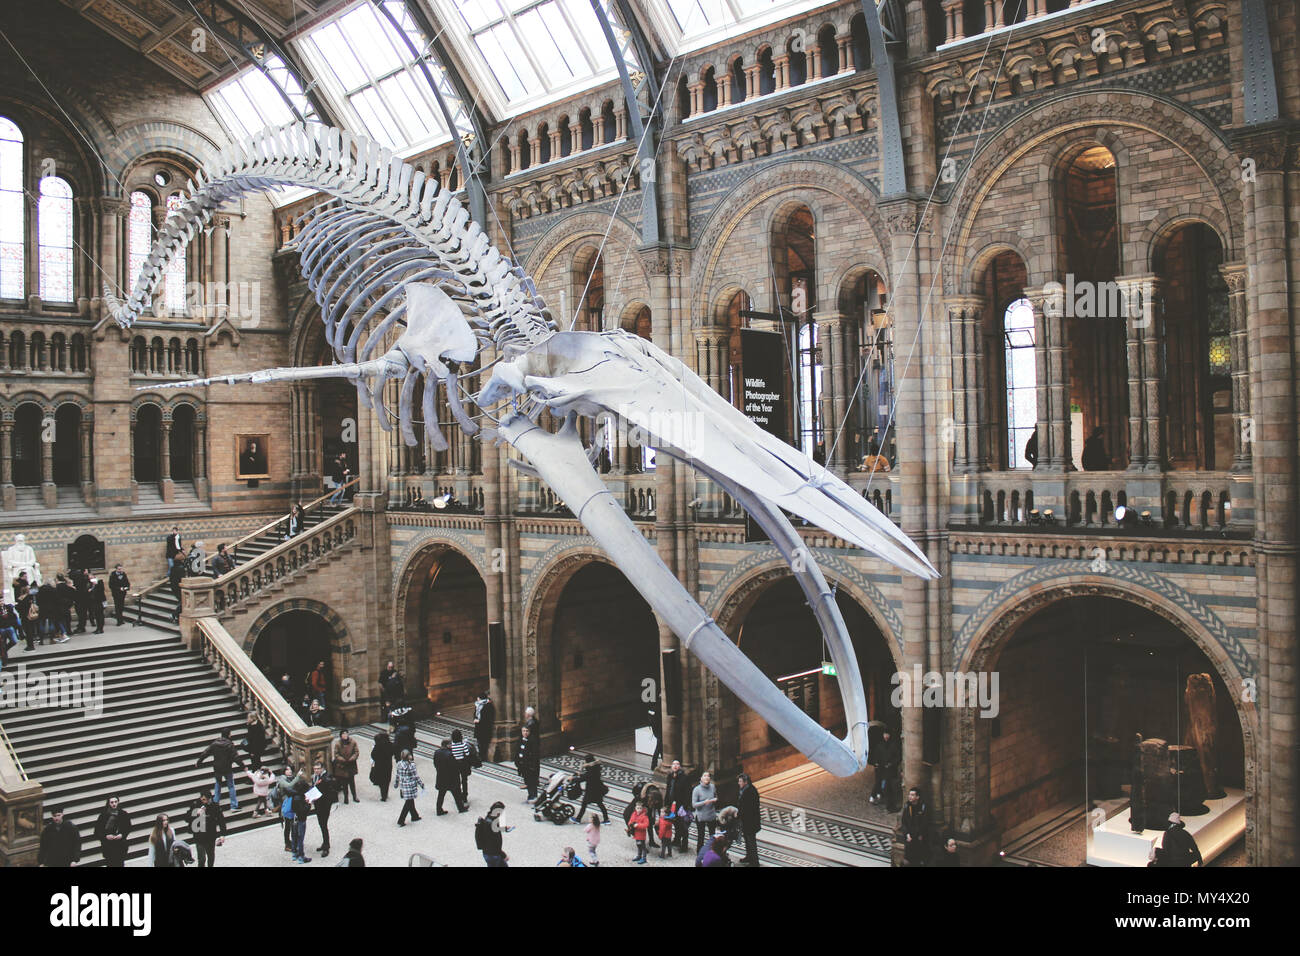 Skeleton of a blue whale in the Natural History Museum in London. Stock Photo